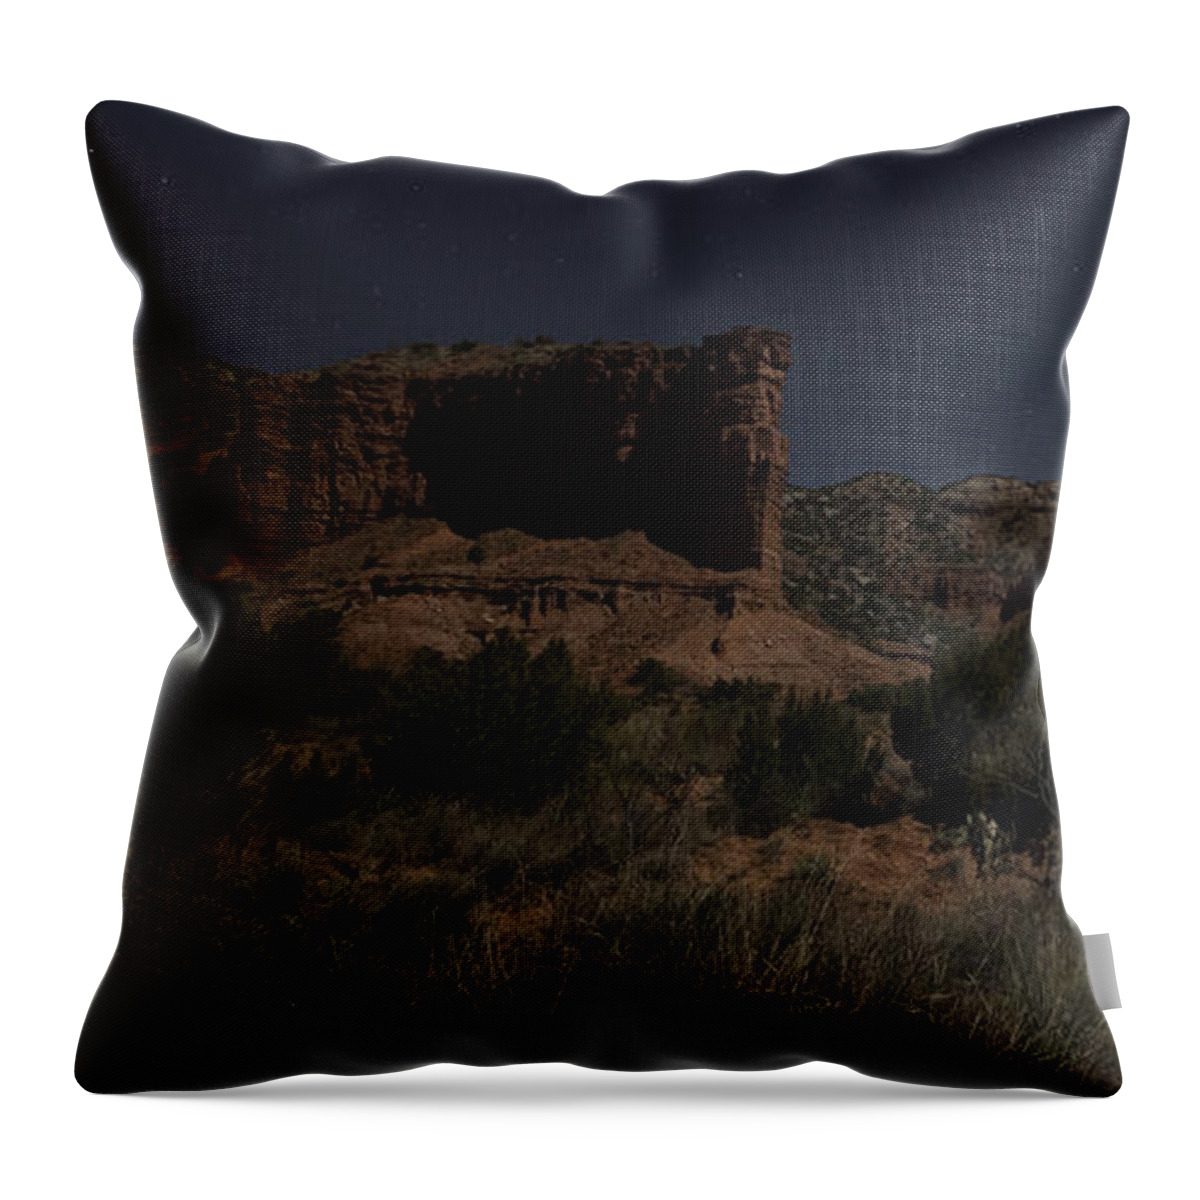 Night Throw Pillow featuring the photograph Moonlit Path by Melany Sarafis